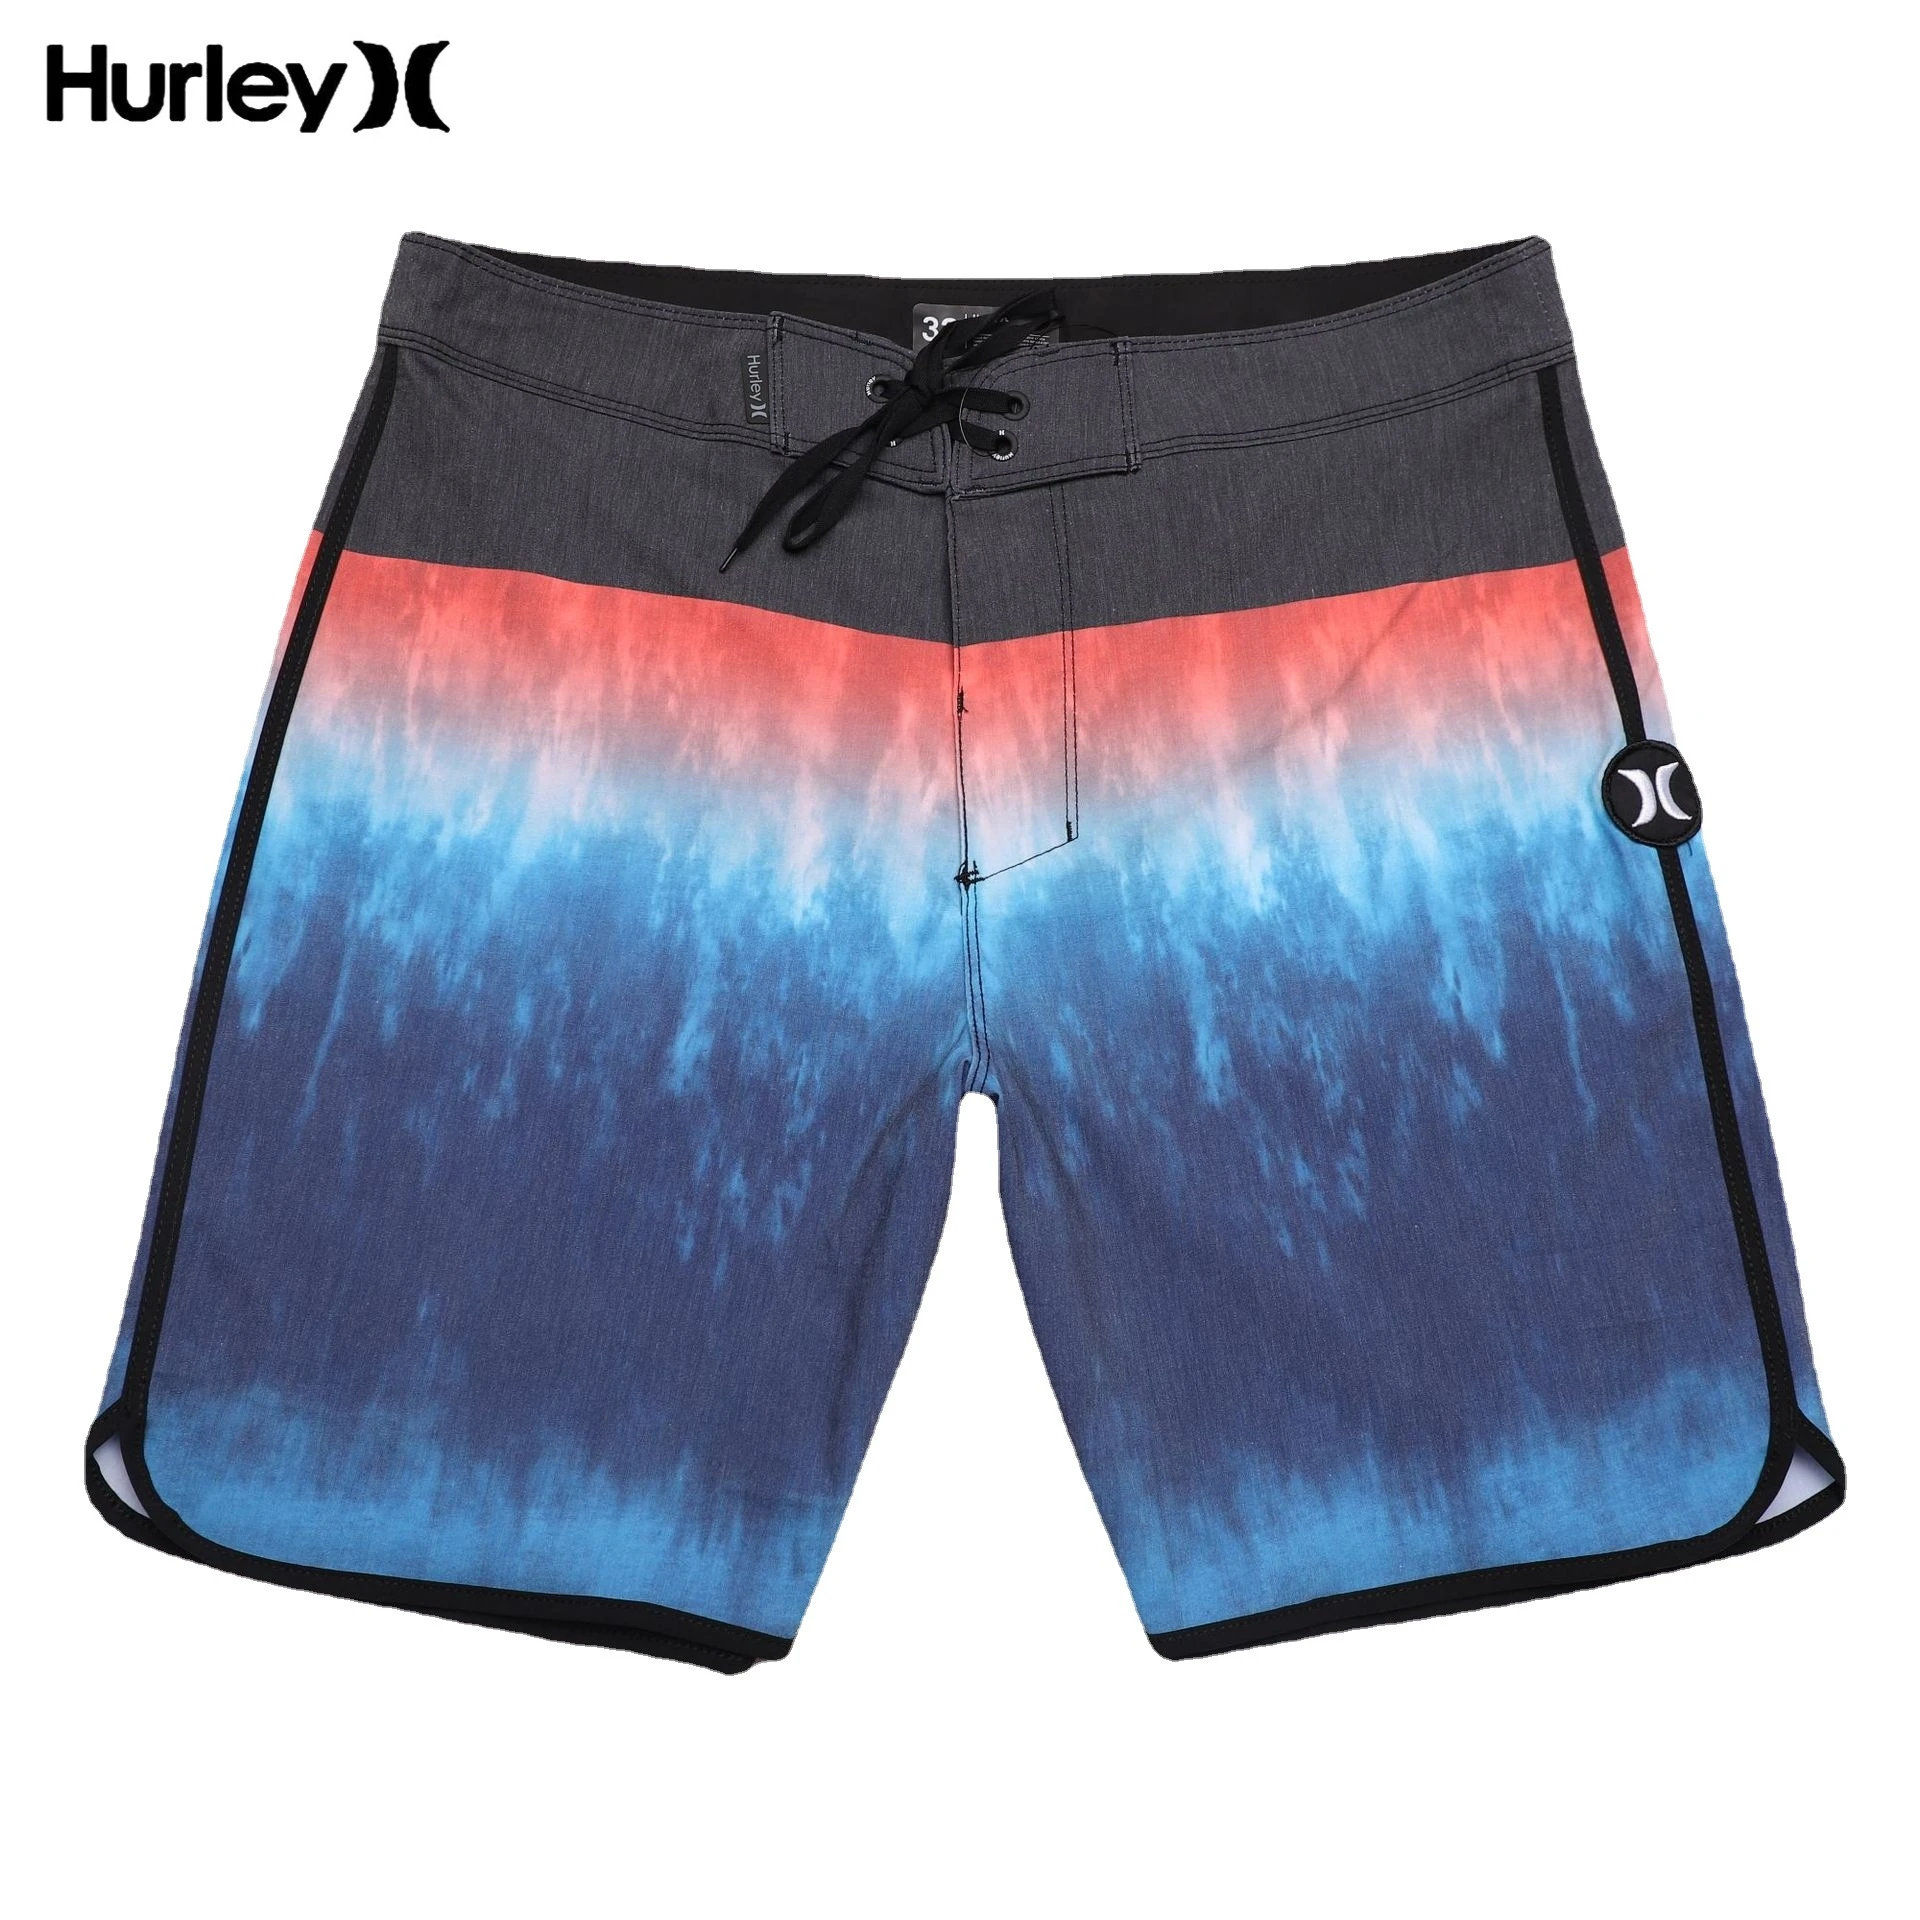 

Hurley Vêtements De Plage Men Leisure Sports Fitness Vacation Swimming Quick Drying Loose Seaside Surf Beach Shorts Bodybuilding